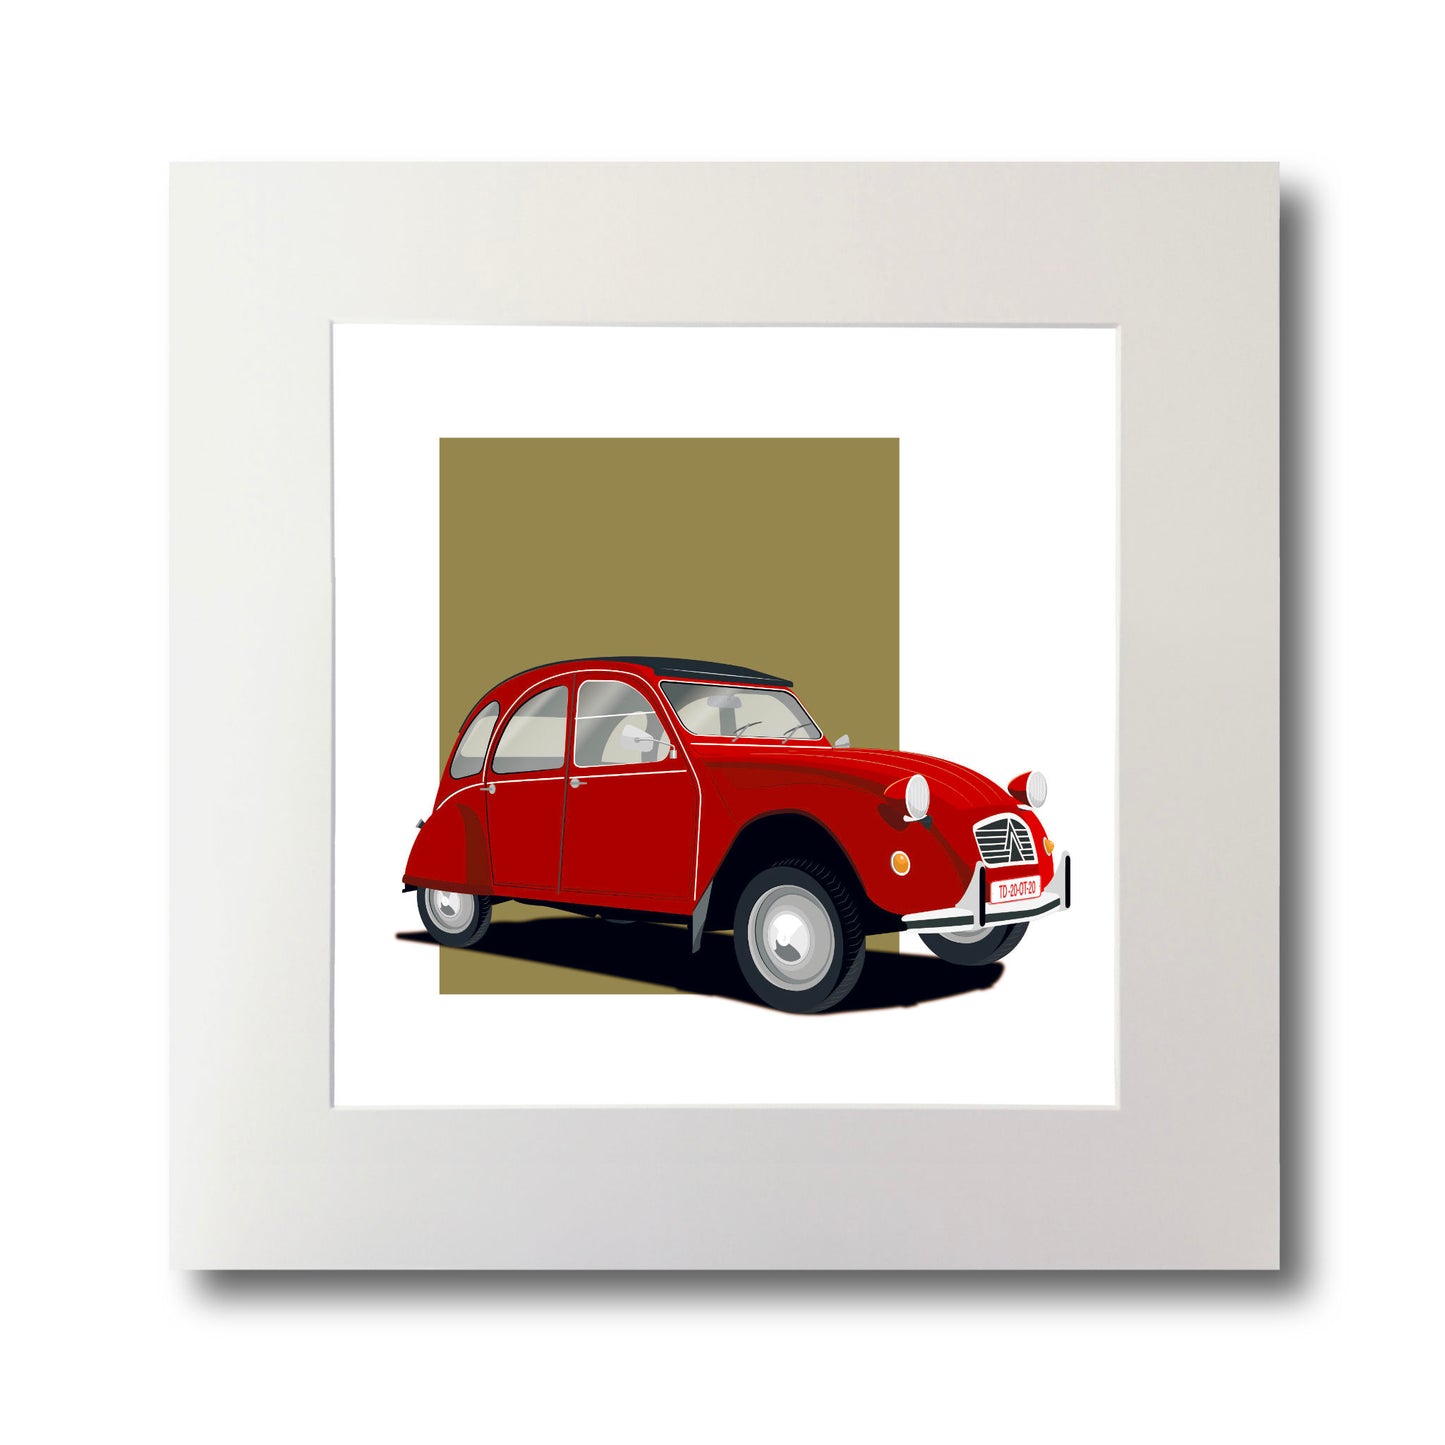 Illustration of a red Citroën 2CV, mounted and measuring 30 by 30 cm